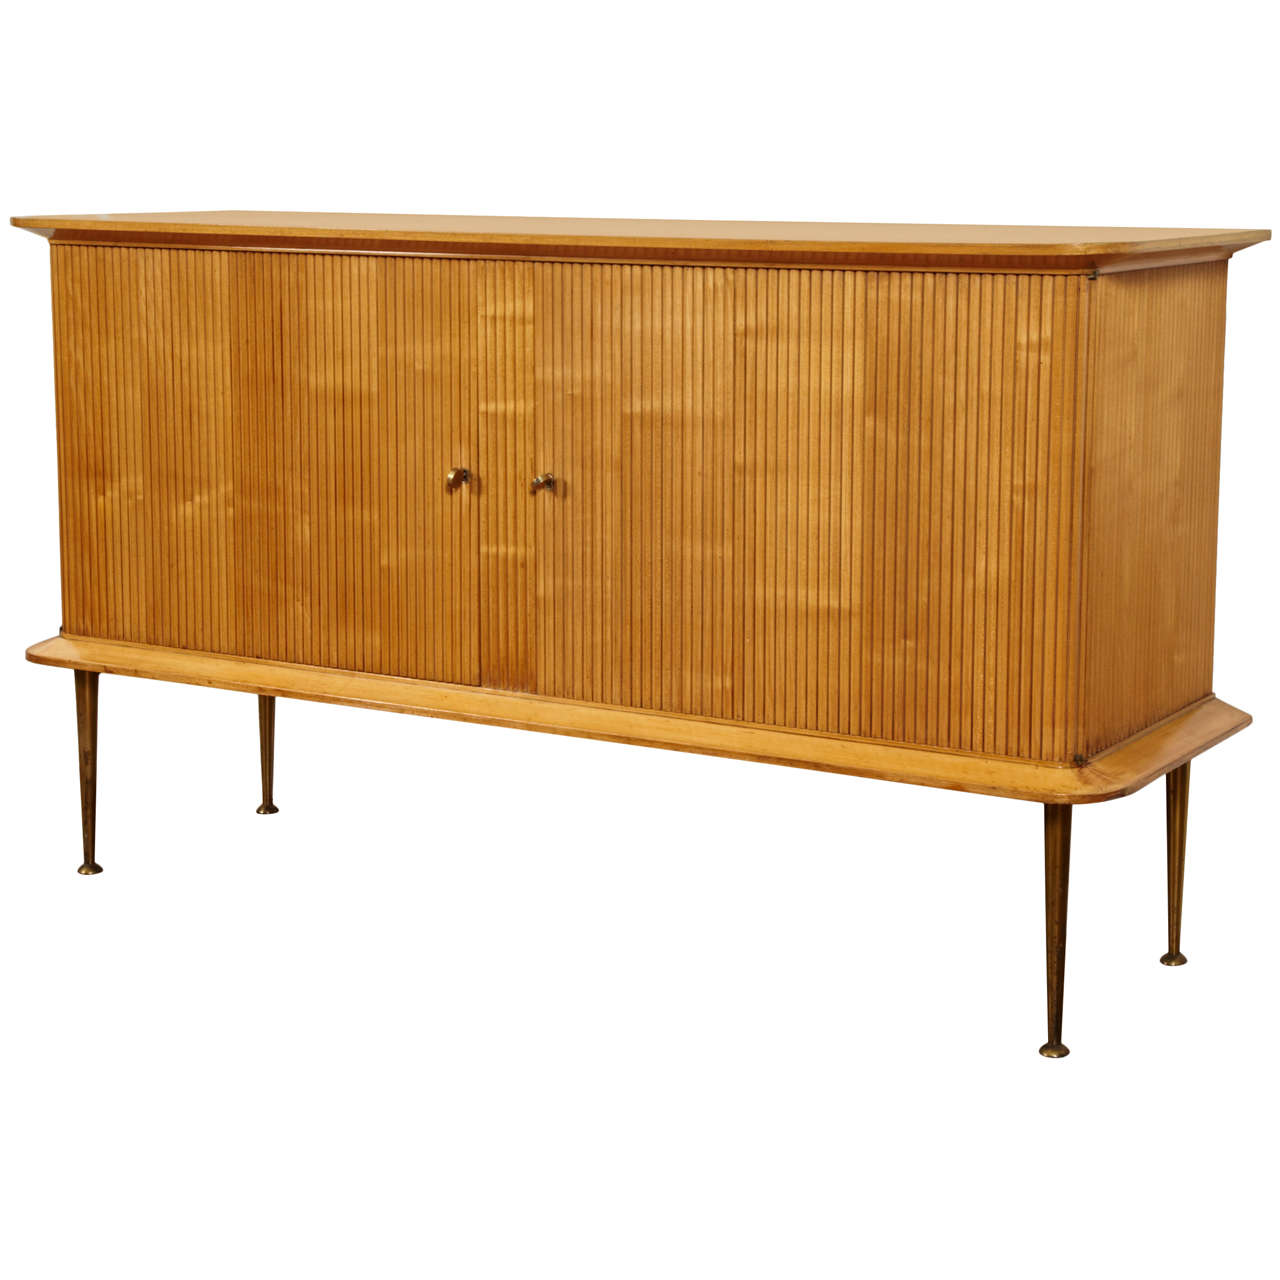 Sideboard attributed to Jacques Dumond, circa 1950.